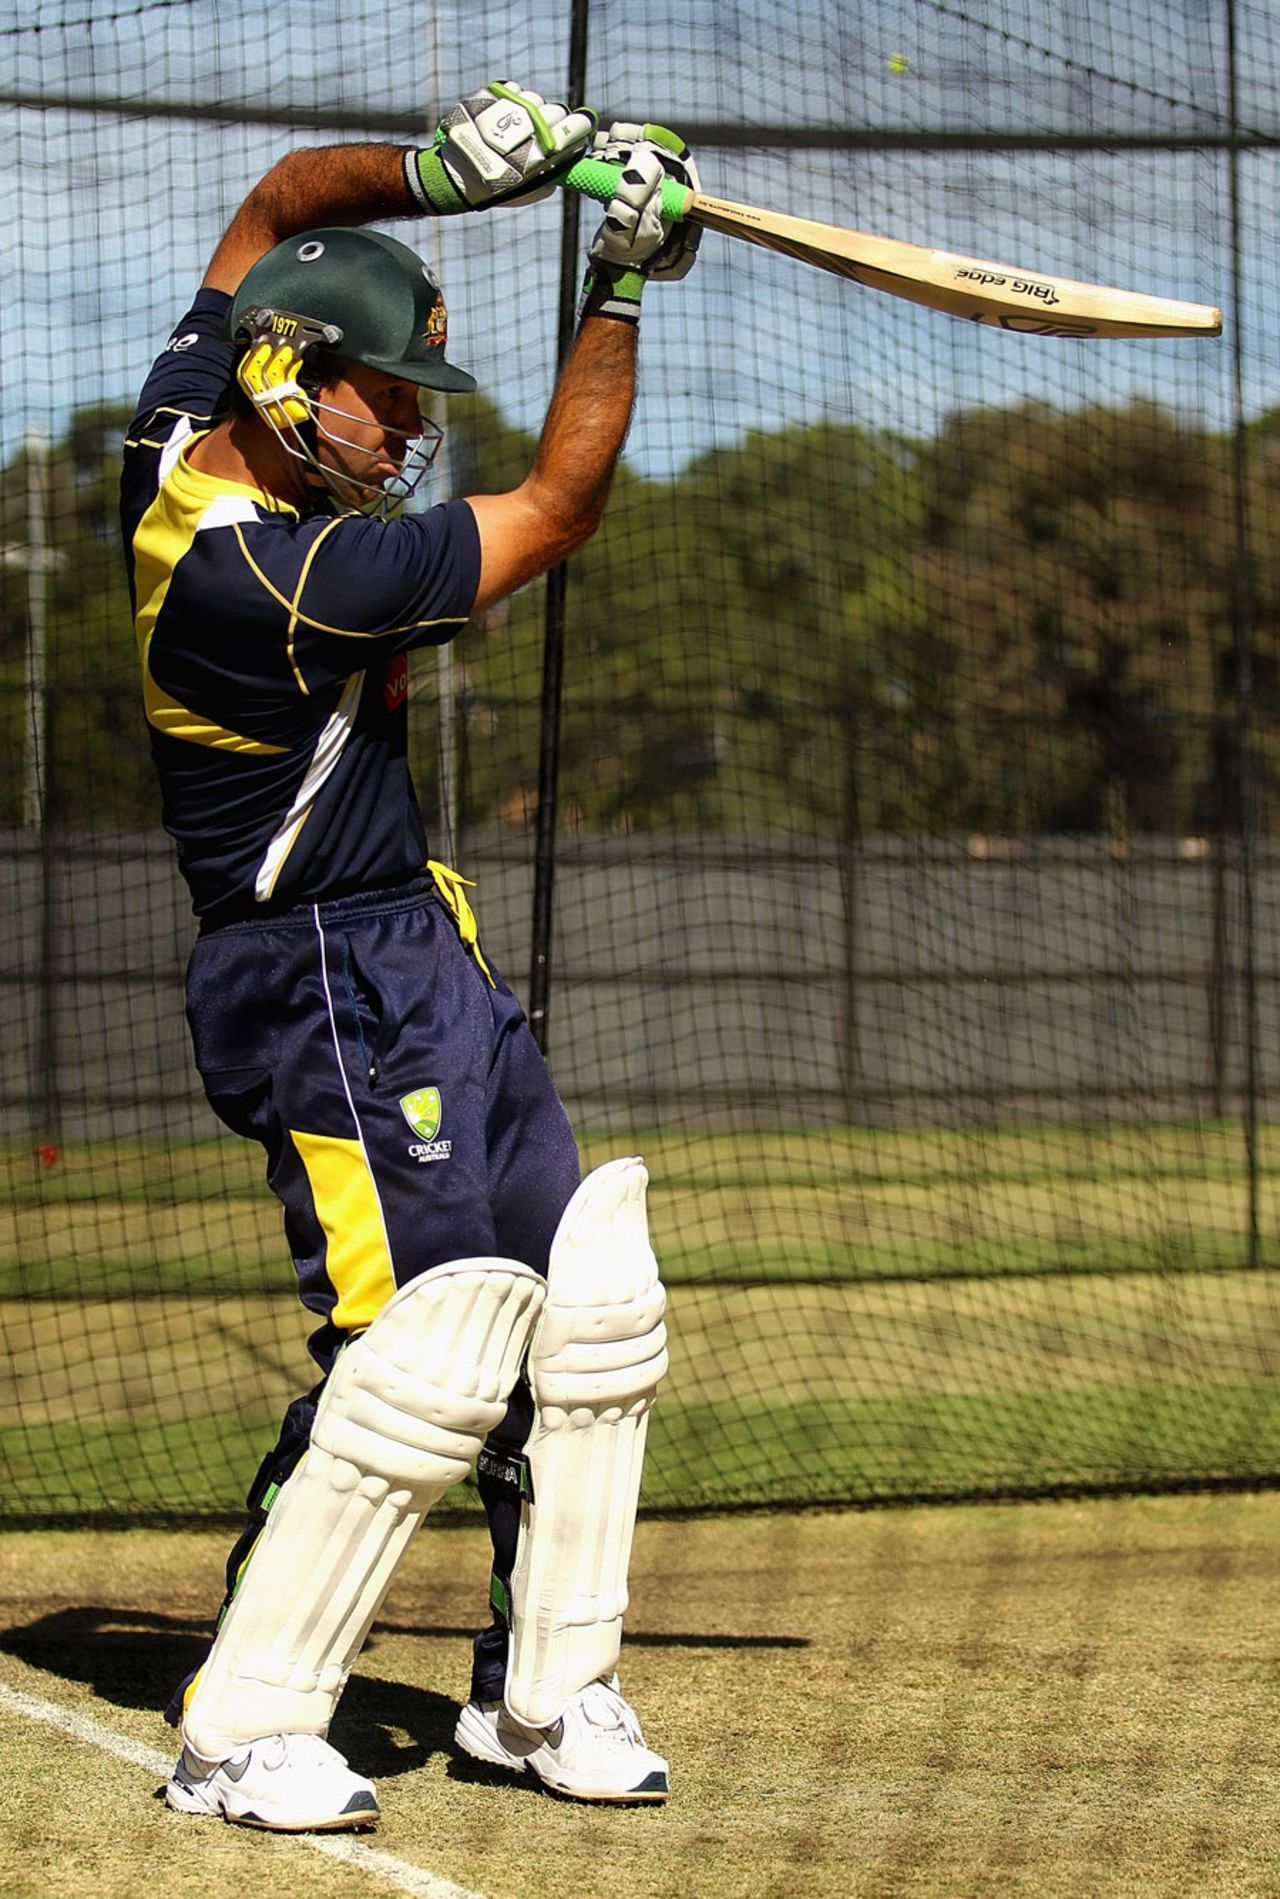 Ricky Ponting at a training session, Adelaide, January 23, 2012